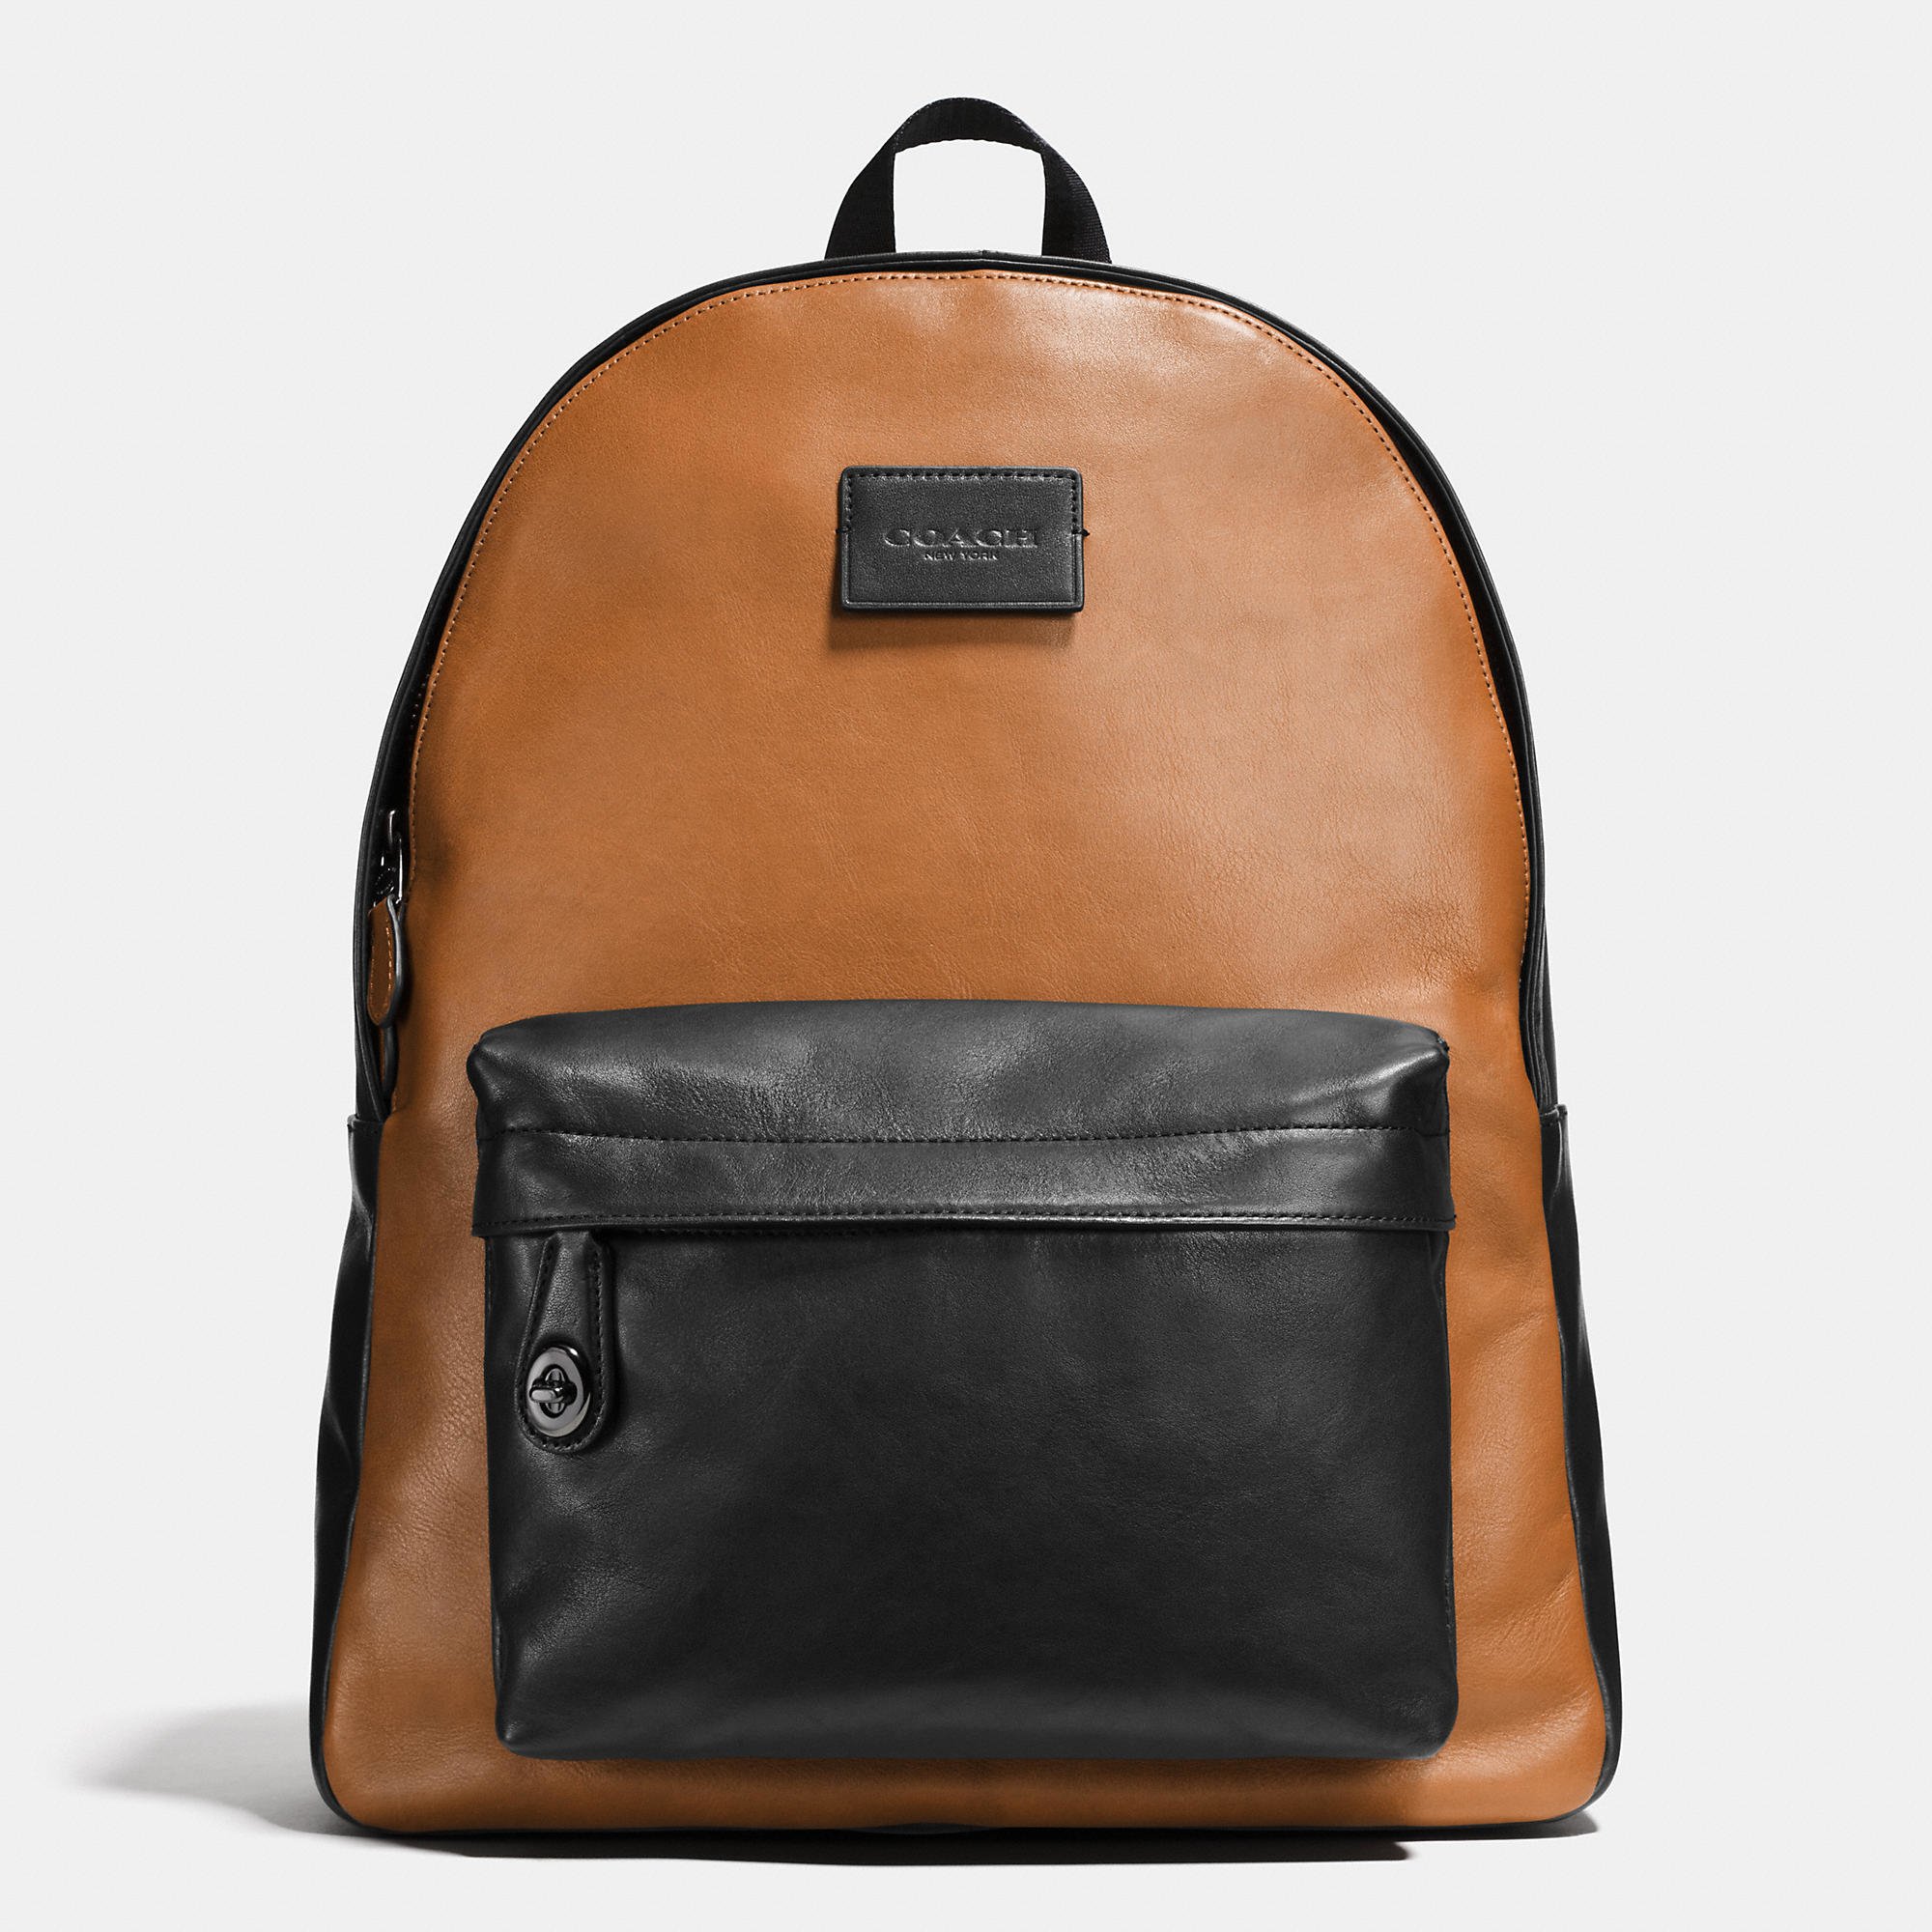 Coach Laptop Backpack Black | IUCN Water